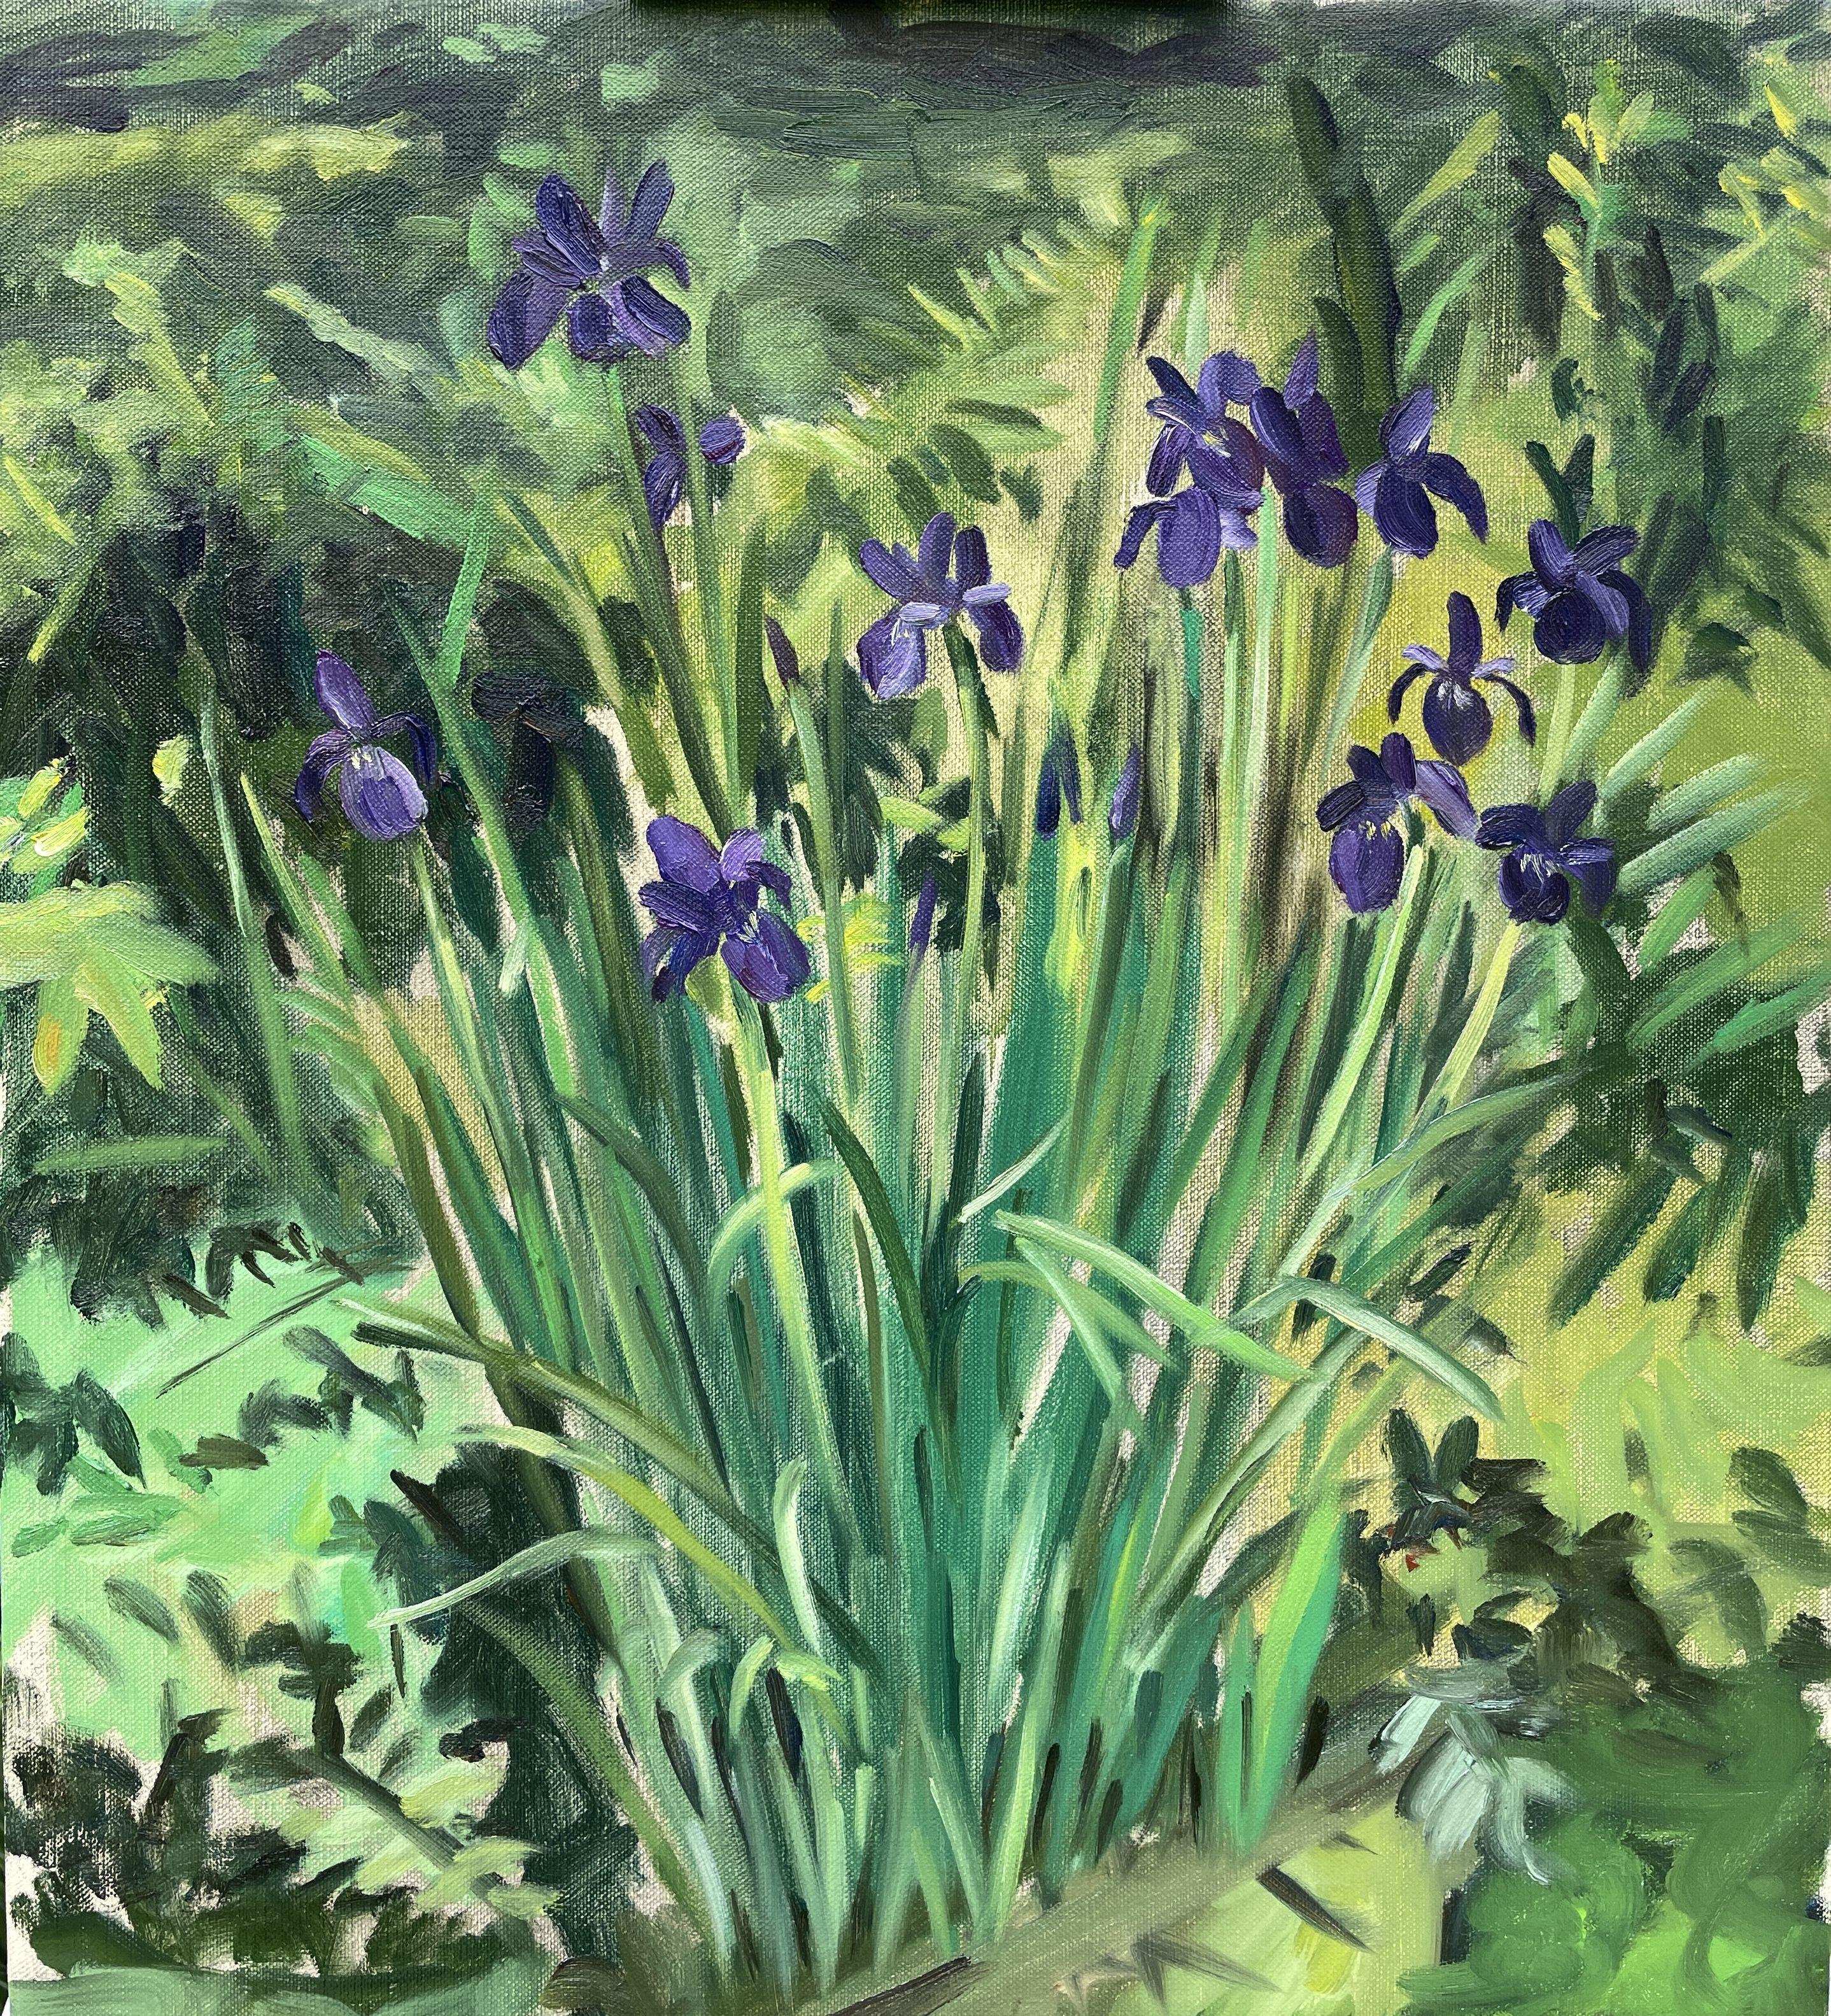 This original oil painting was painted en plein air (outdoors) by Eric Alexander Santoli.  It was painted in the Van Vleck gardens of Montclair, N.J.  The color and vibrant brush strokes capture the summer light hitting a patch of growing irises. ::